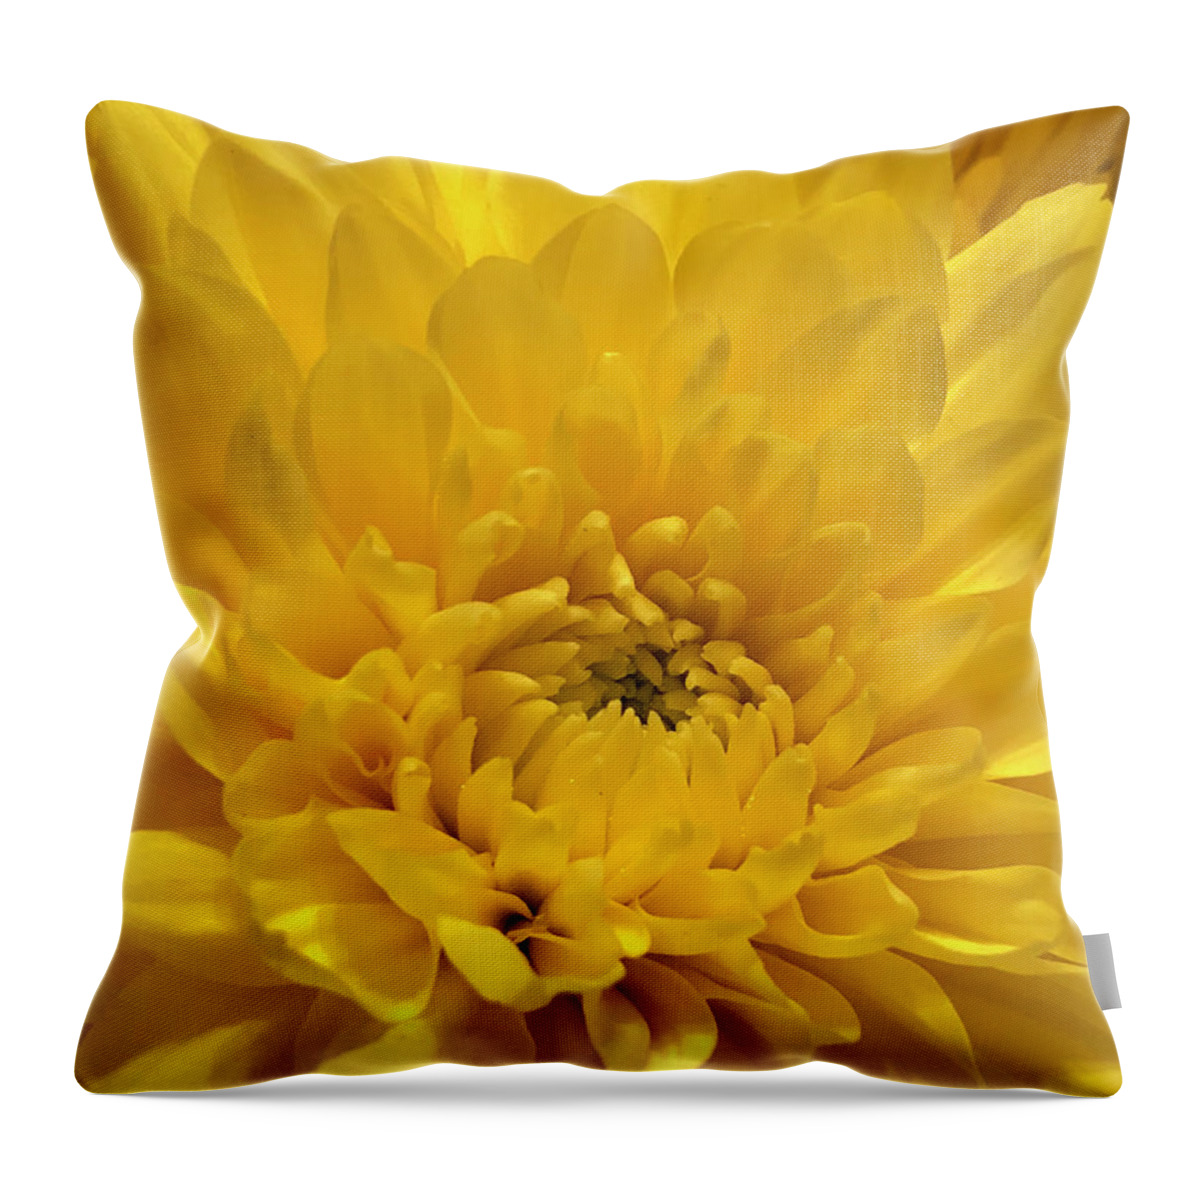 Flower Throw Pillow featuring the photograph Sunshine Chrysanthemum by CAC Graphics